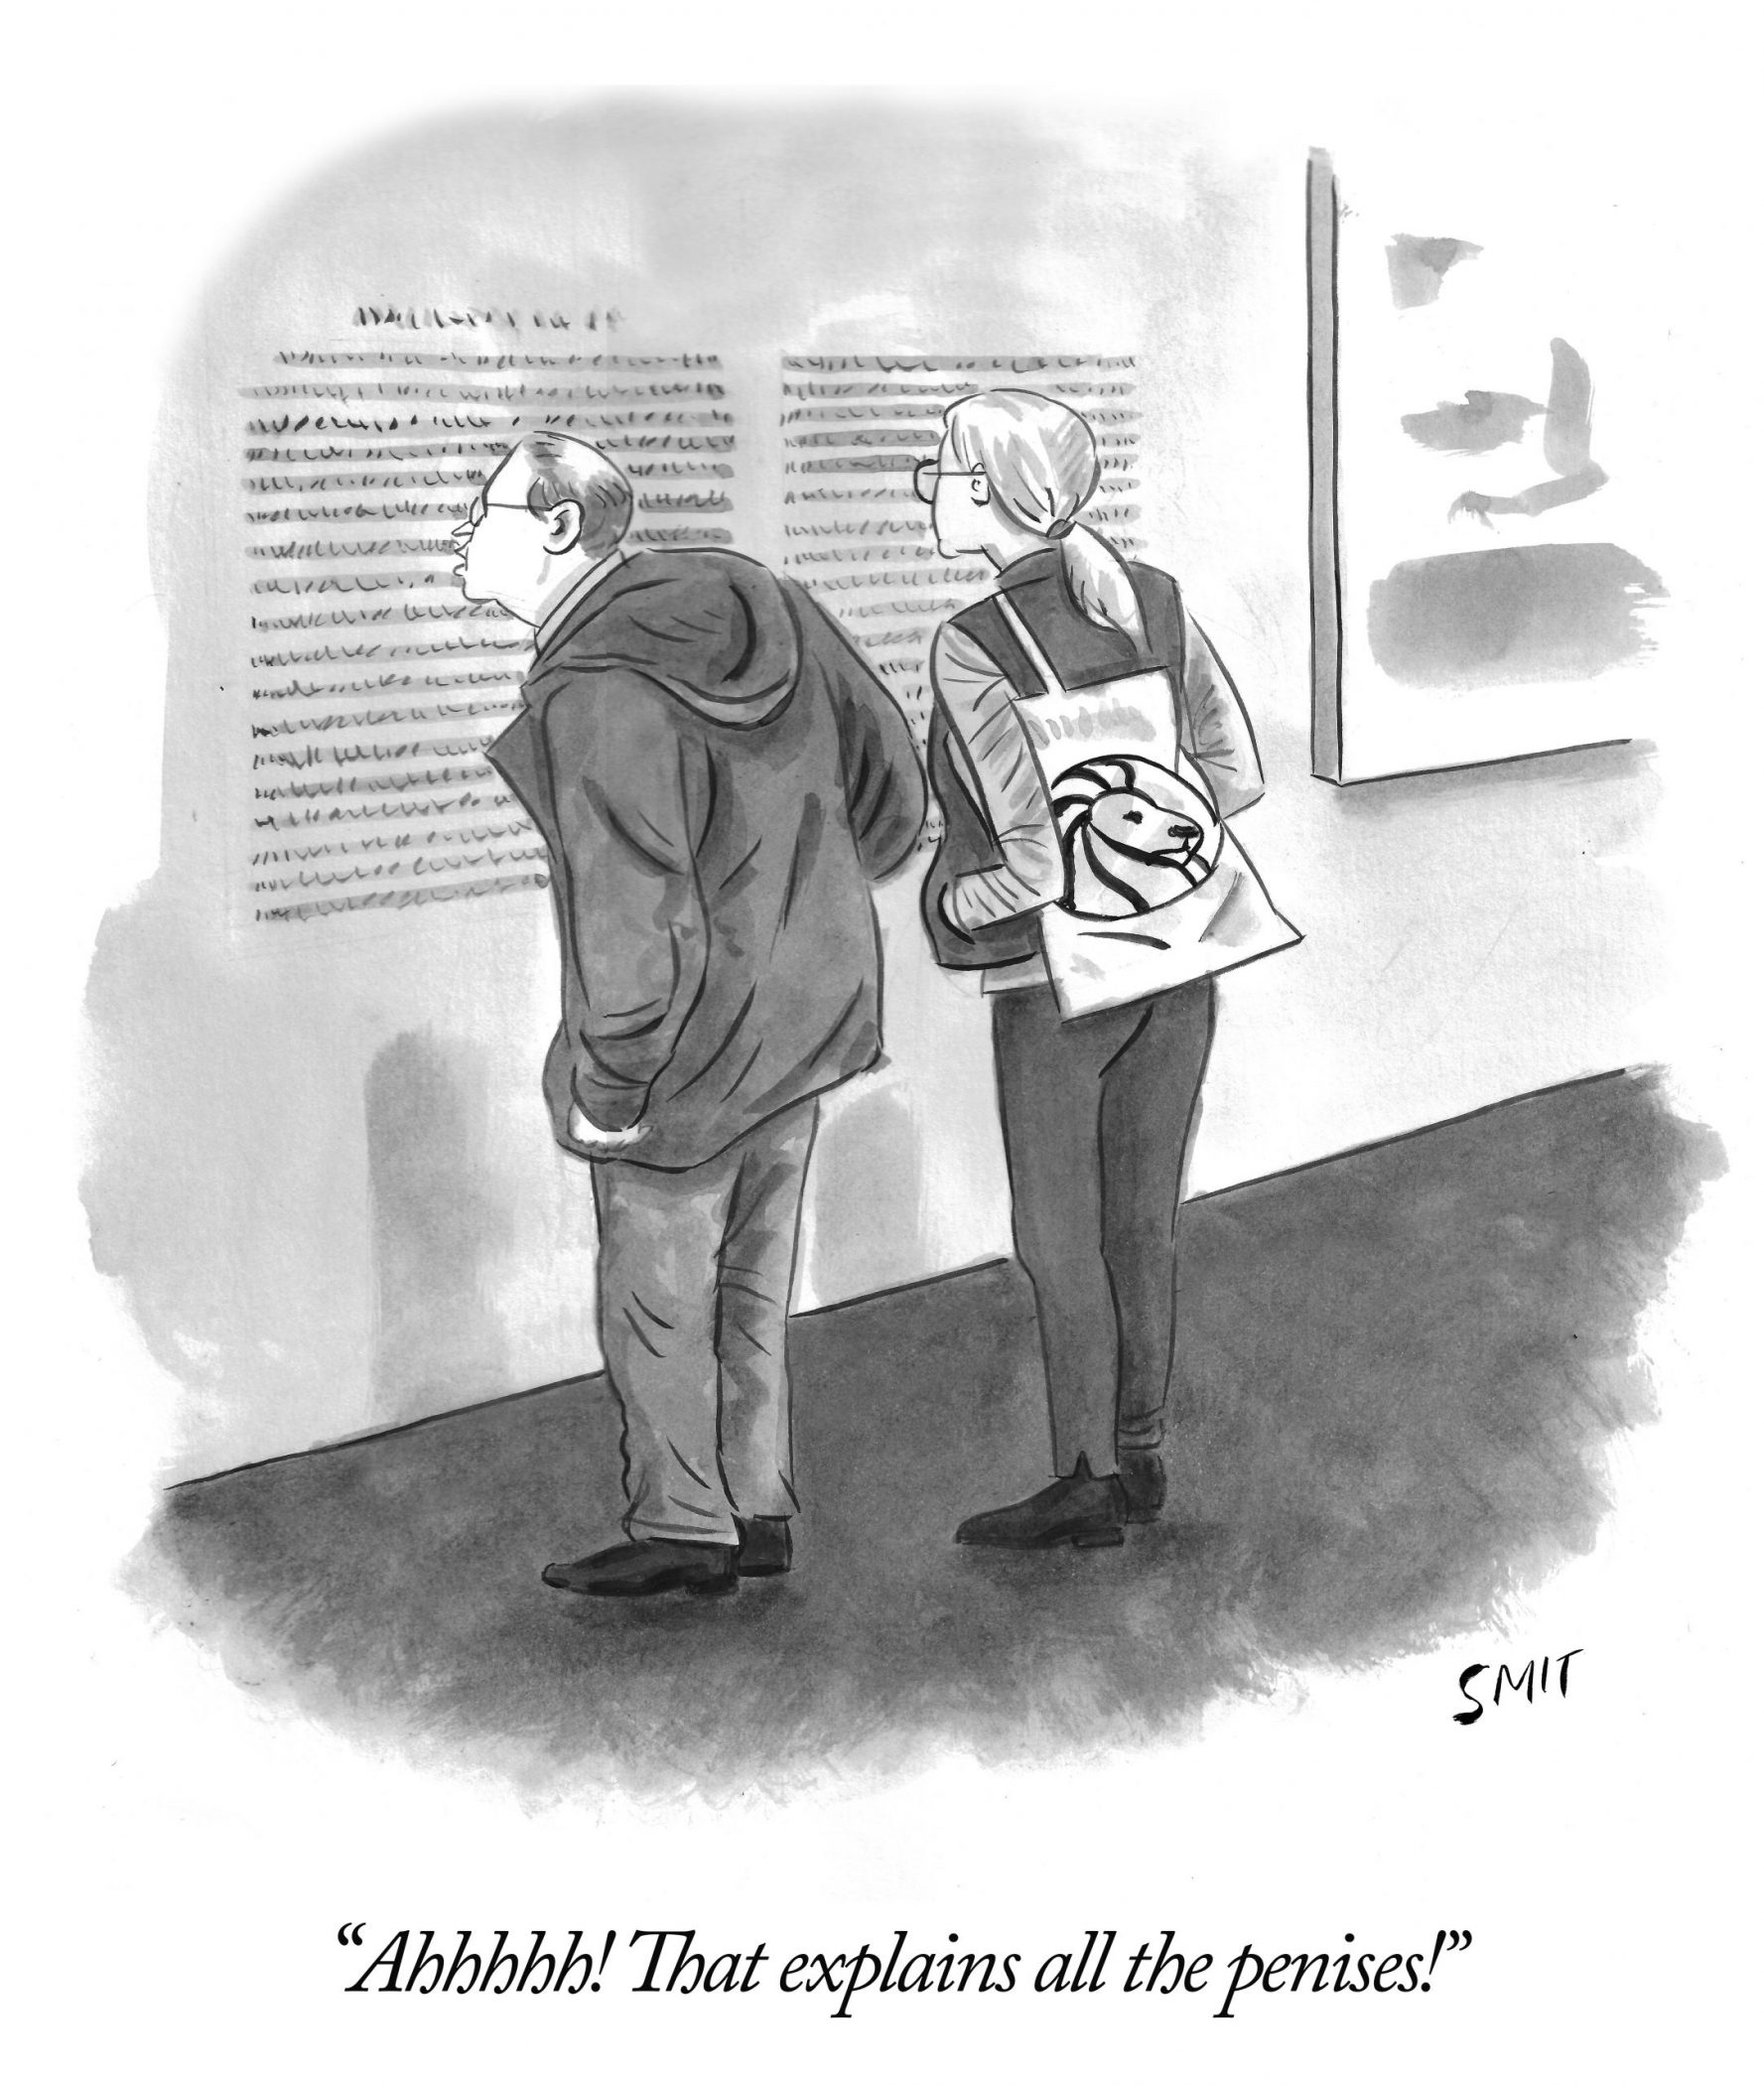 Can Art Still Be Good If It Only Makes Sense After You Read the Wall Text? [ Cartoon]